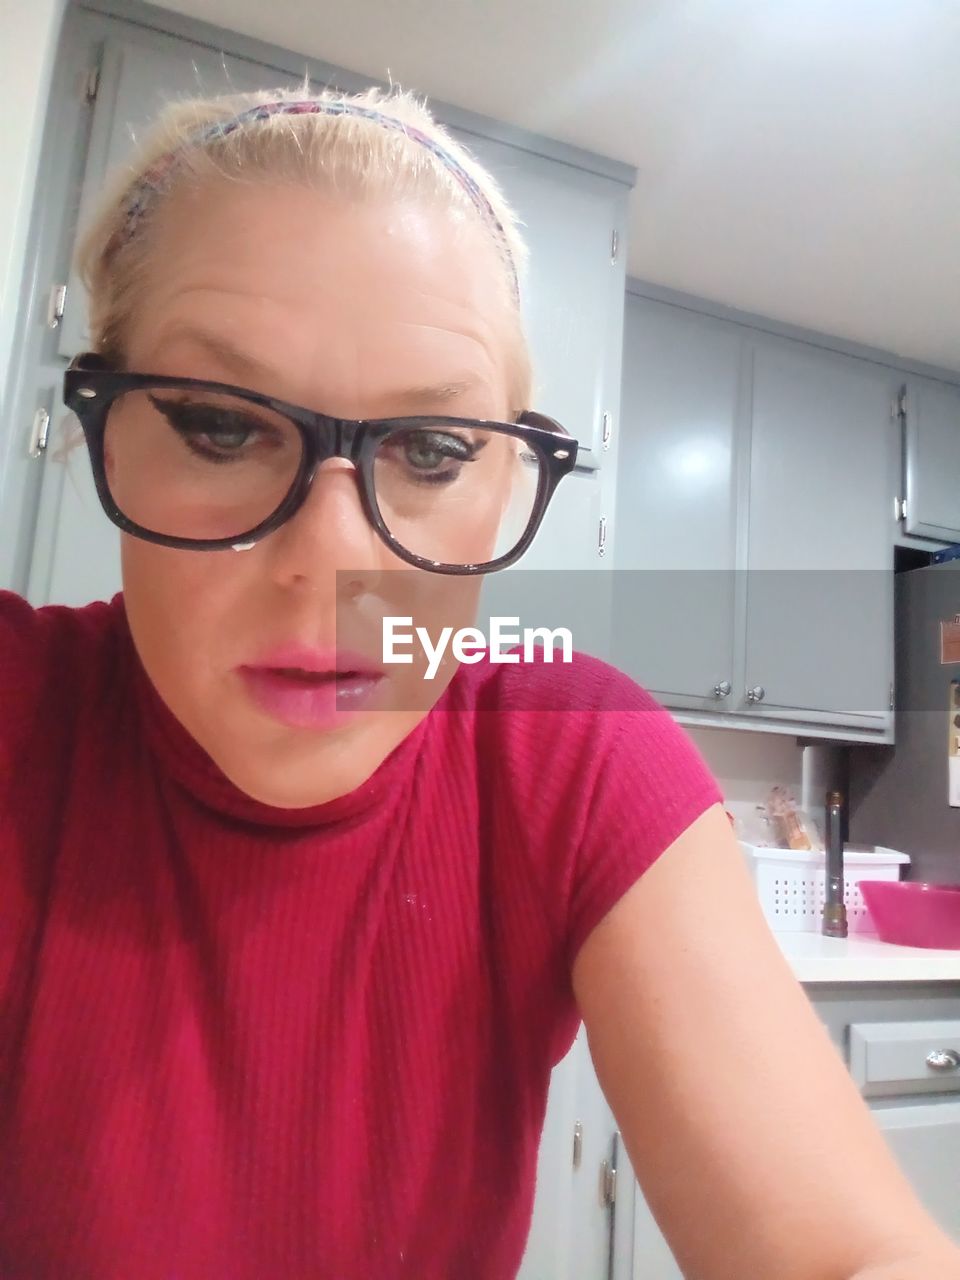 eyeglasses, glasses, vision care, one person, indoors, portrait, child, women, human face, person, adult, female, childhood, human hair, skin, looking, front view, lifestyles, waist up, headshot, eyewear, hairstyle, education, healthcare and medicine, looking at camera, nose, emotion, blond hair, pink, clothing